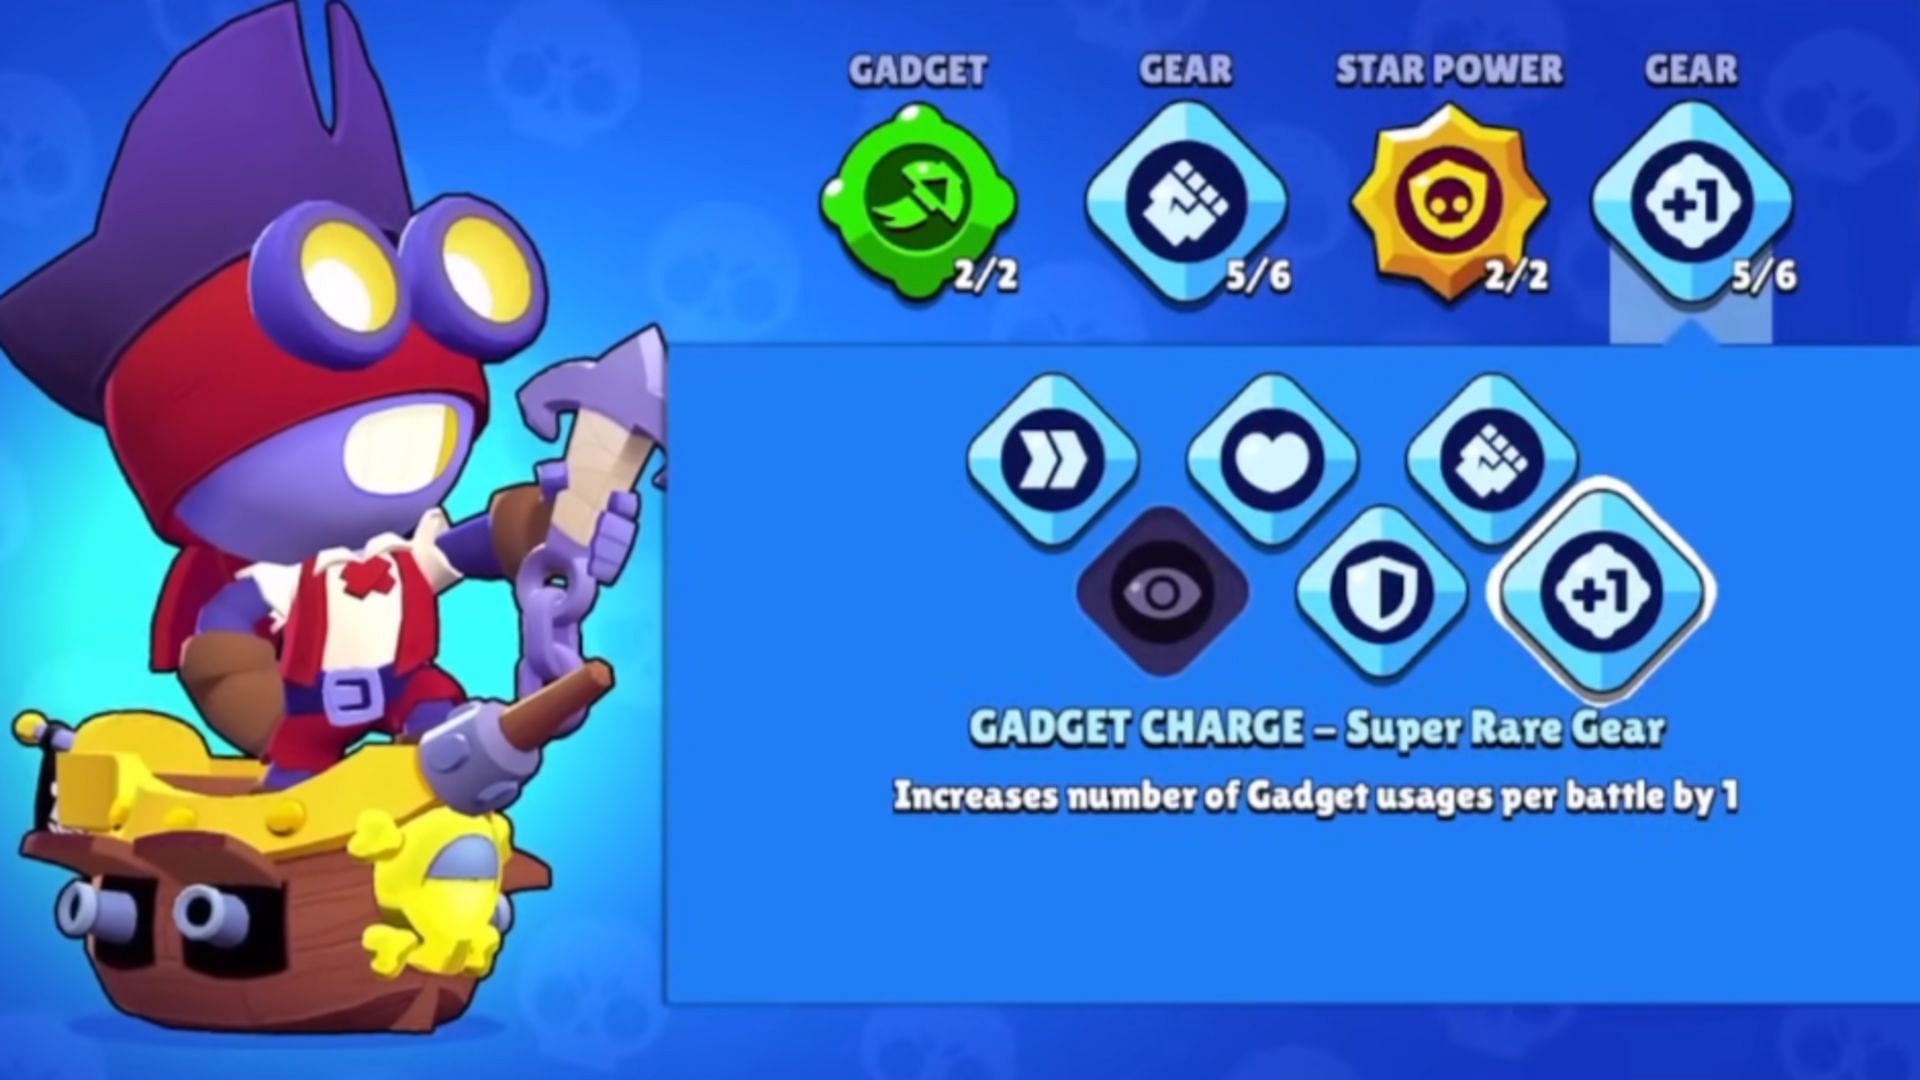 Gadget Charge - Super Rare Gear (Image via Supercell)